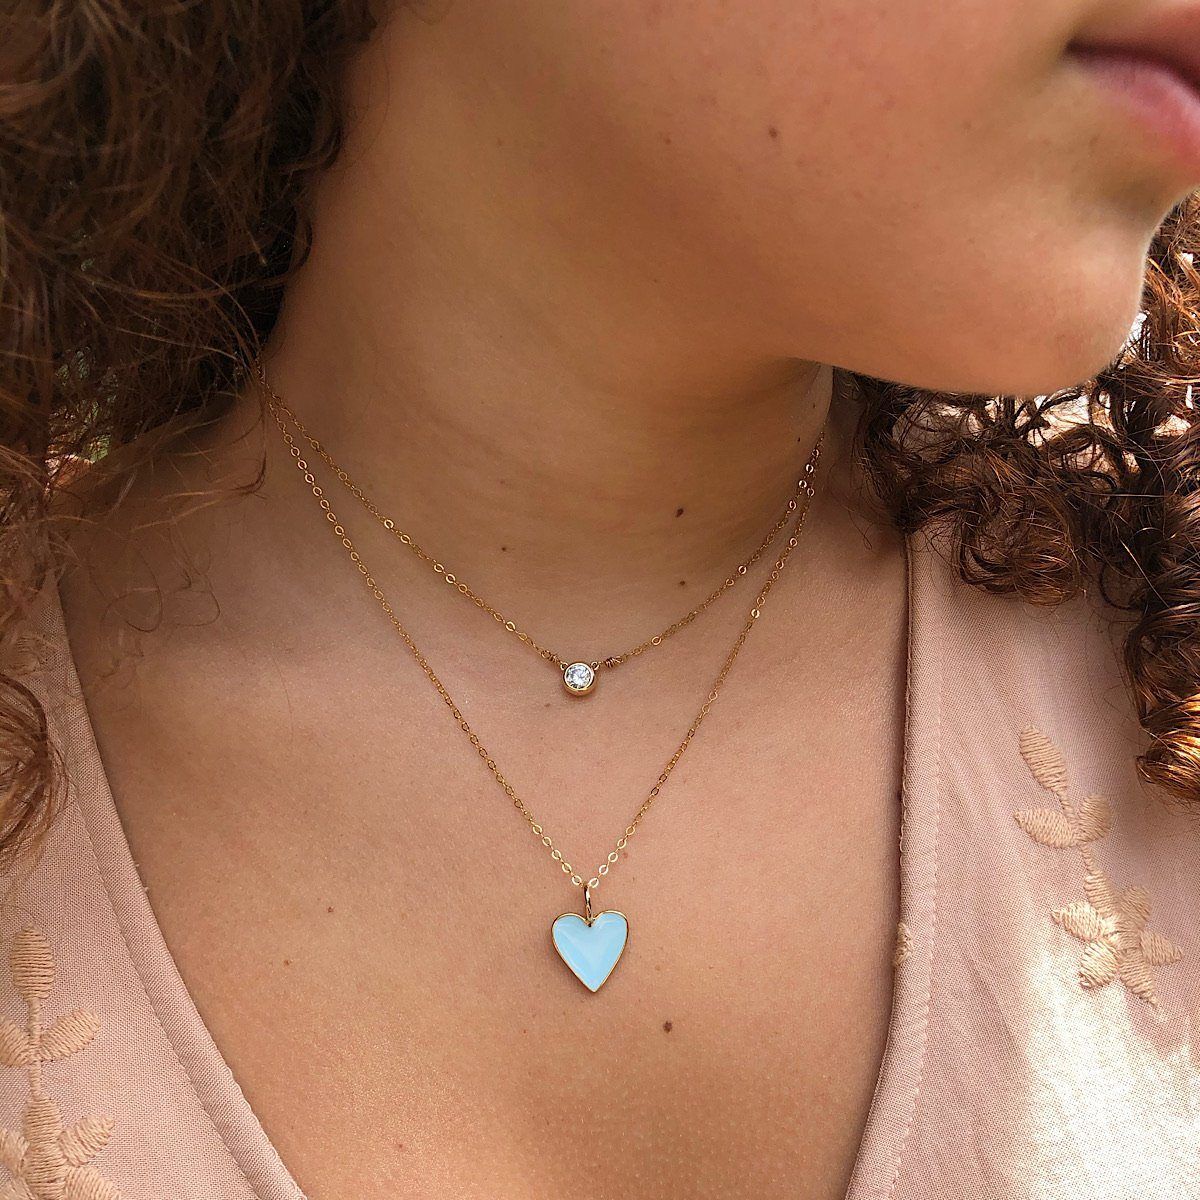 Enameled Heart Bead Necklace: A Timeless Piece of Jewelry